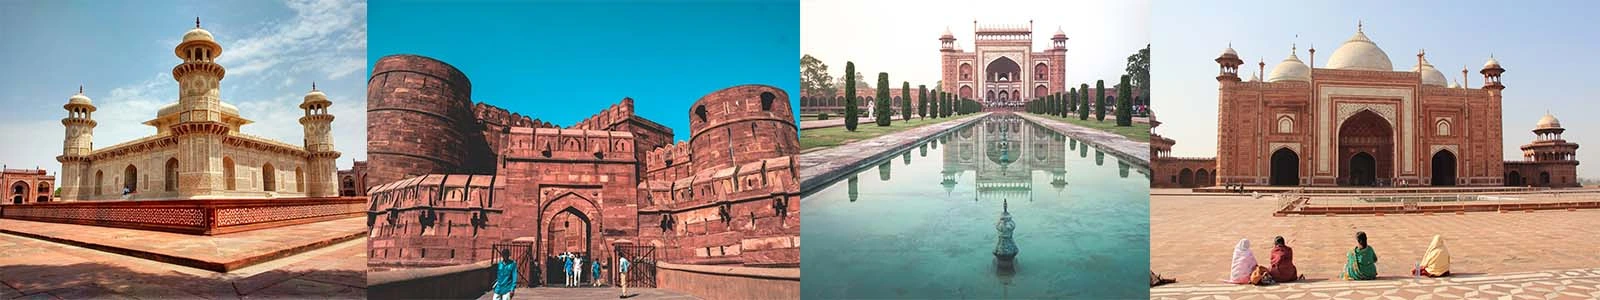 Luxury Tour to Visit Taj Mahal and Agra Fort from Delhi